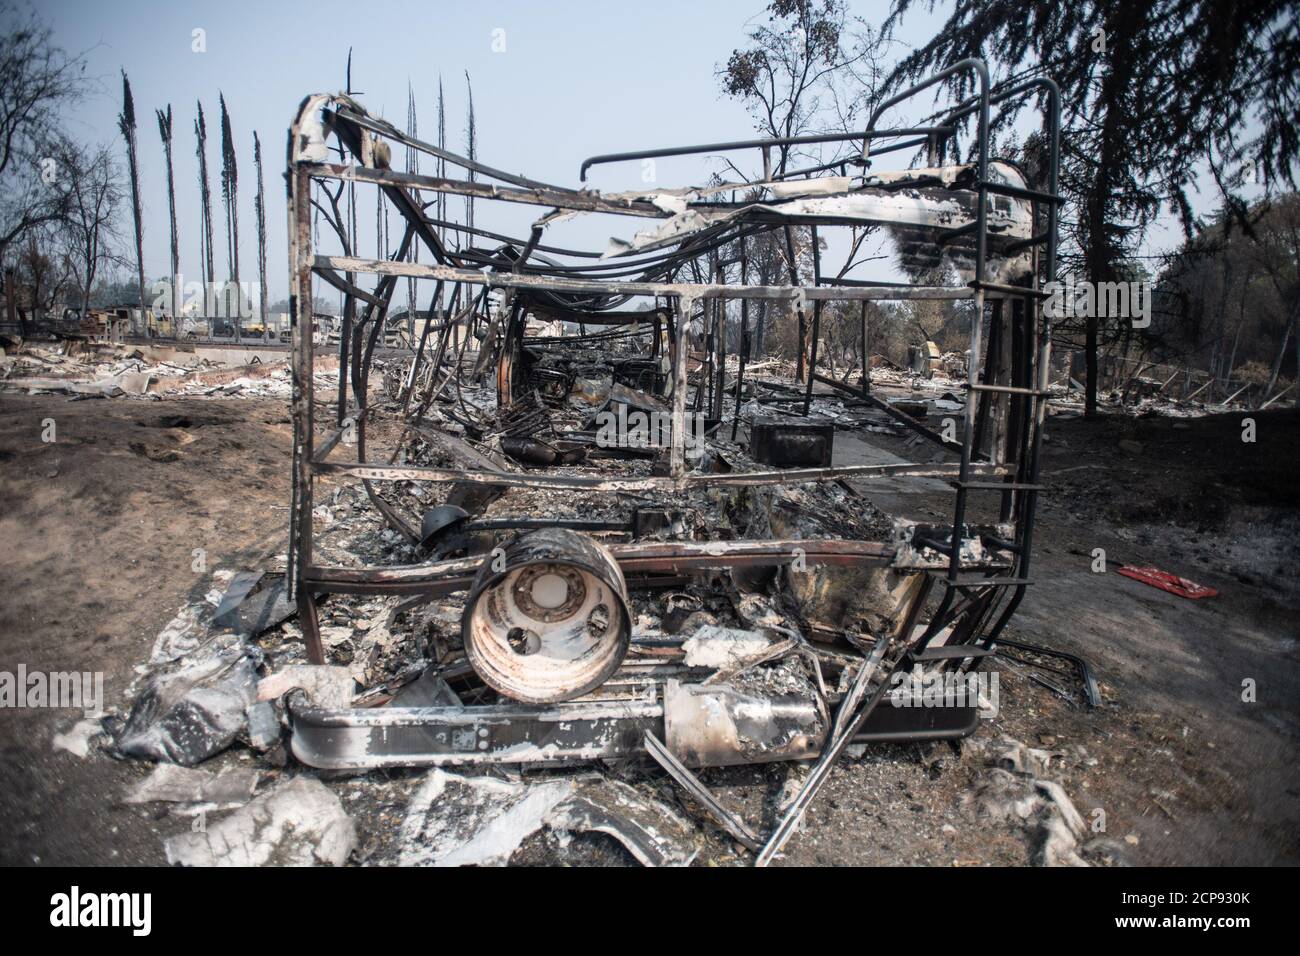 TALENT, ORE - SEPTEMBER 18, 2020: A general view of a burned out vehicle amid the aftermath of the Almeda Fire. The town of Talent, Oregon, showing the burned out homes, cars and rubble left behind. In Talent, about 20 miles north of the California border, homes were charred beyond recognition. Across the western US, at least 87 wildfires are burning, according to the National Interagency Fire Center. They've torched more than 4.7 million acres -- more than six times the area of Rhode Island. Credit: Chris Tuite/imageSPACE Stock Photo